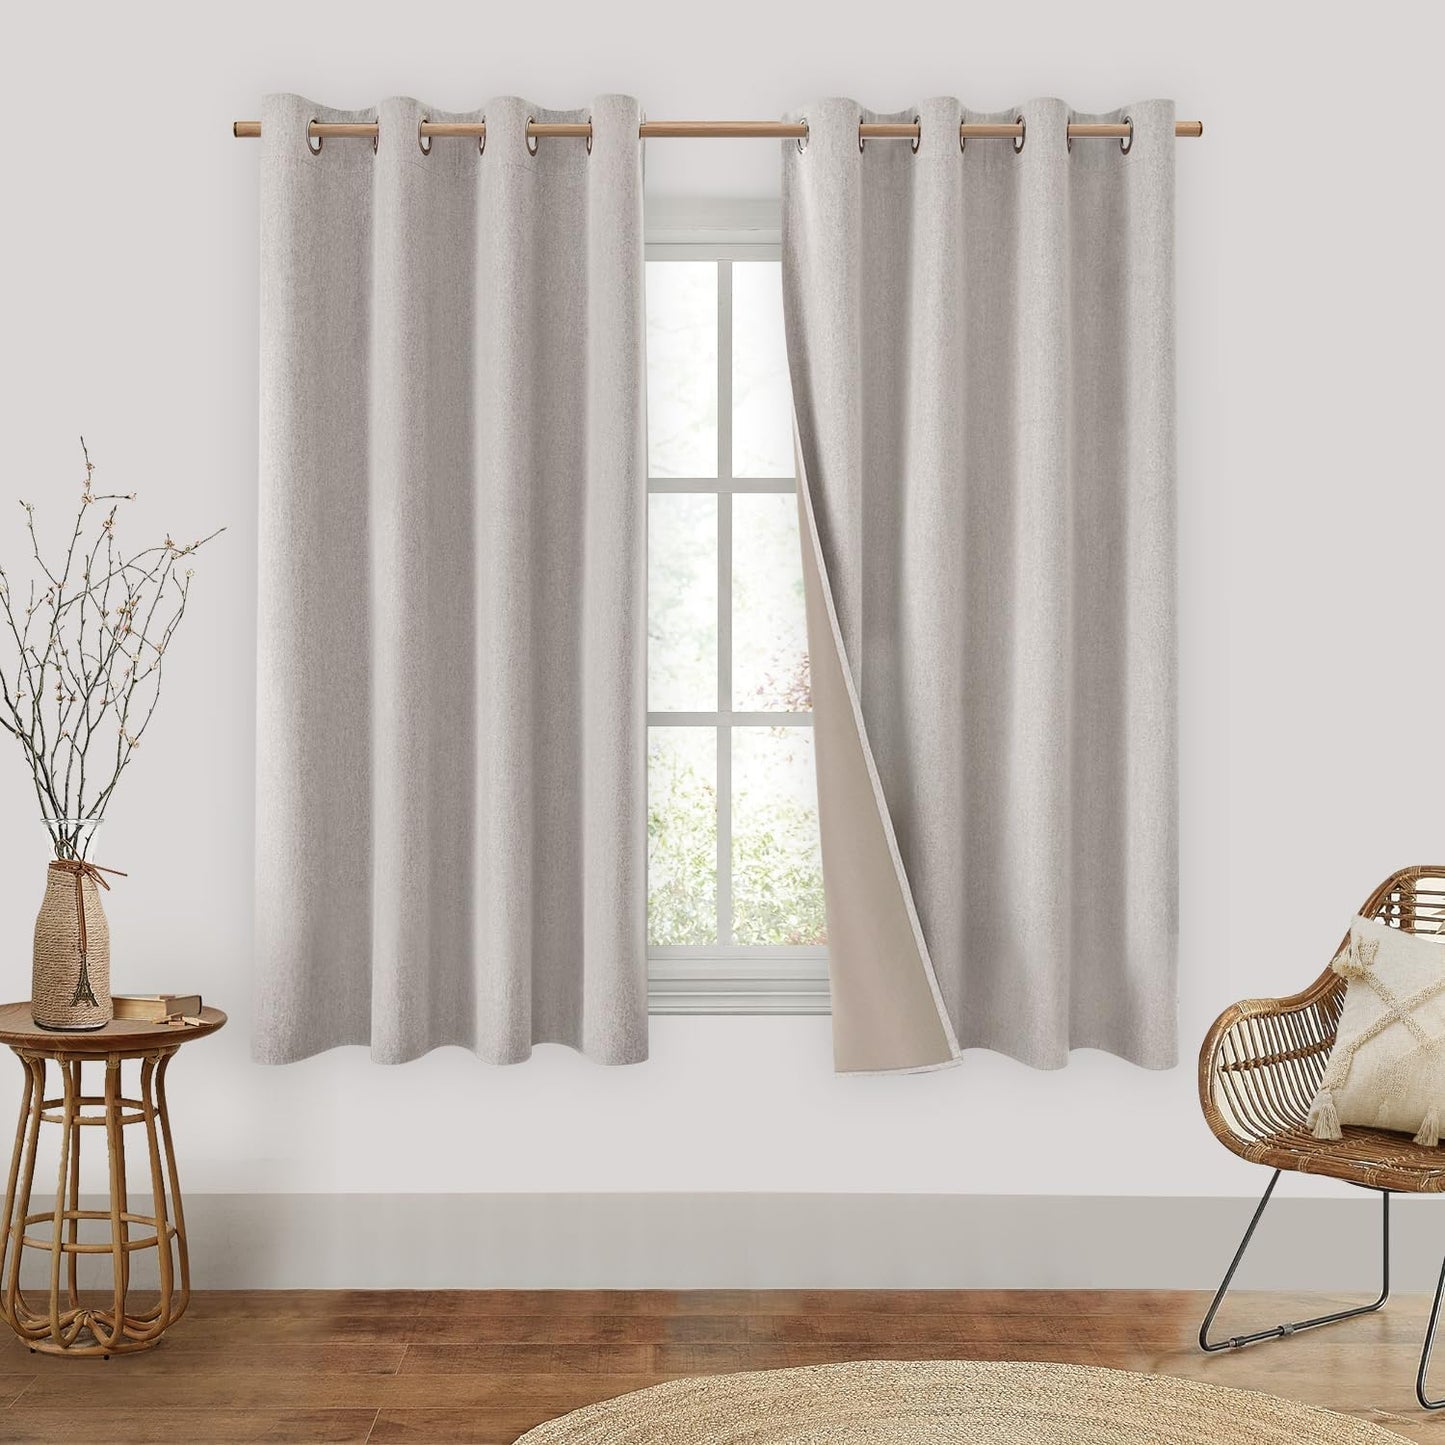 HOMEIDEAS 100% Blackout Linen Curtains for Bedroom 84 Inches Long 2 Panels Blush Pink Curtains Full Black Out Thermal Insulated Grommet Window Curtains/Drapes with Liner for Nursery  HOMEIDEAS Natural 52"W X 63"L 